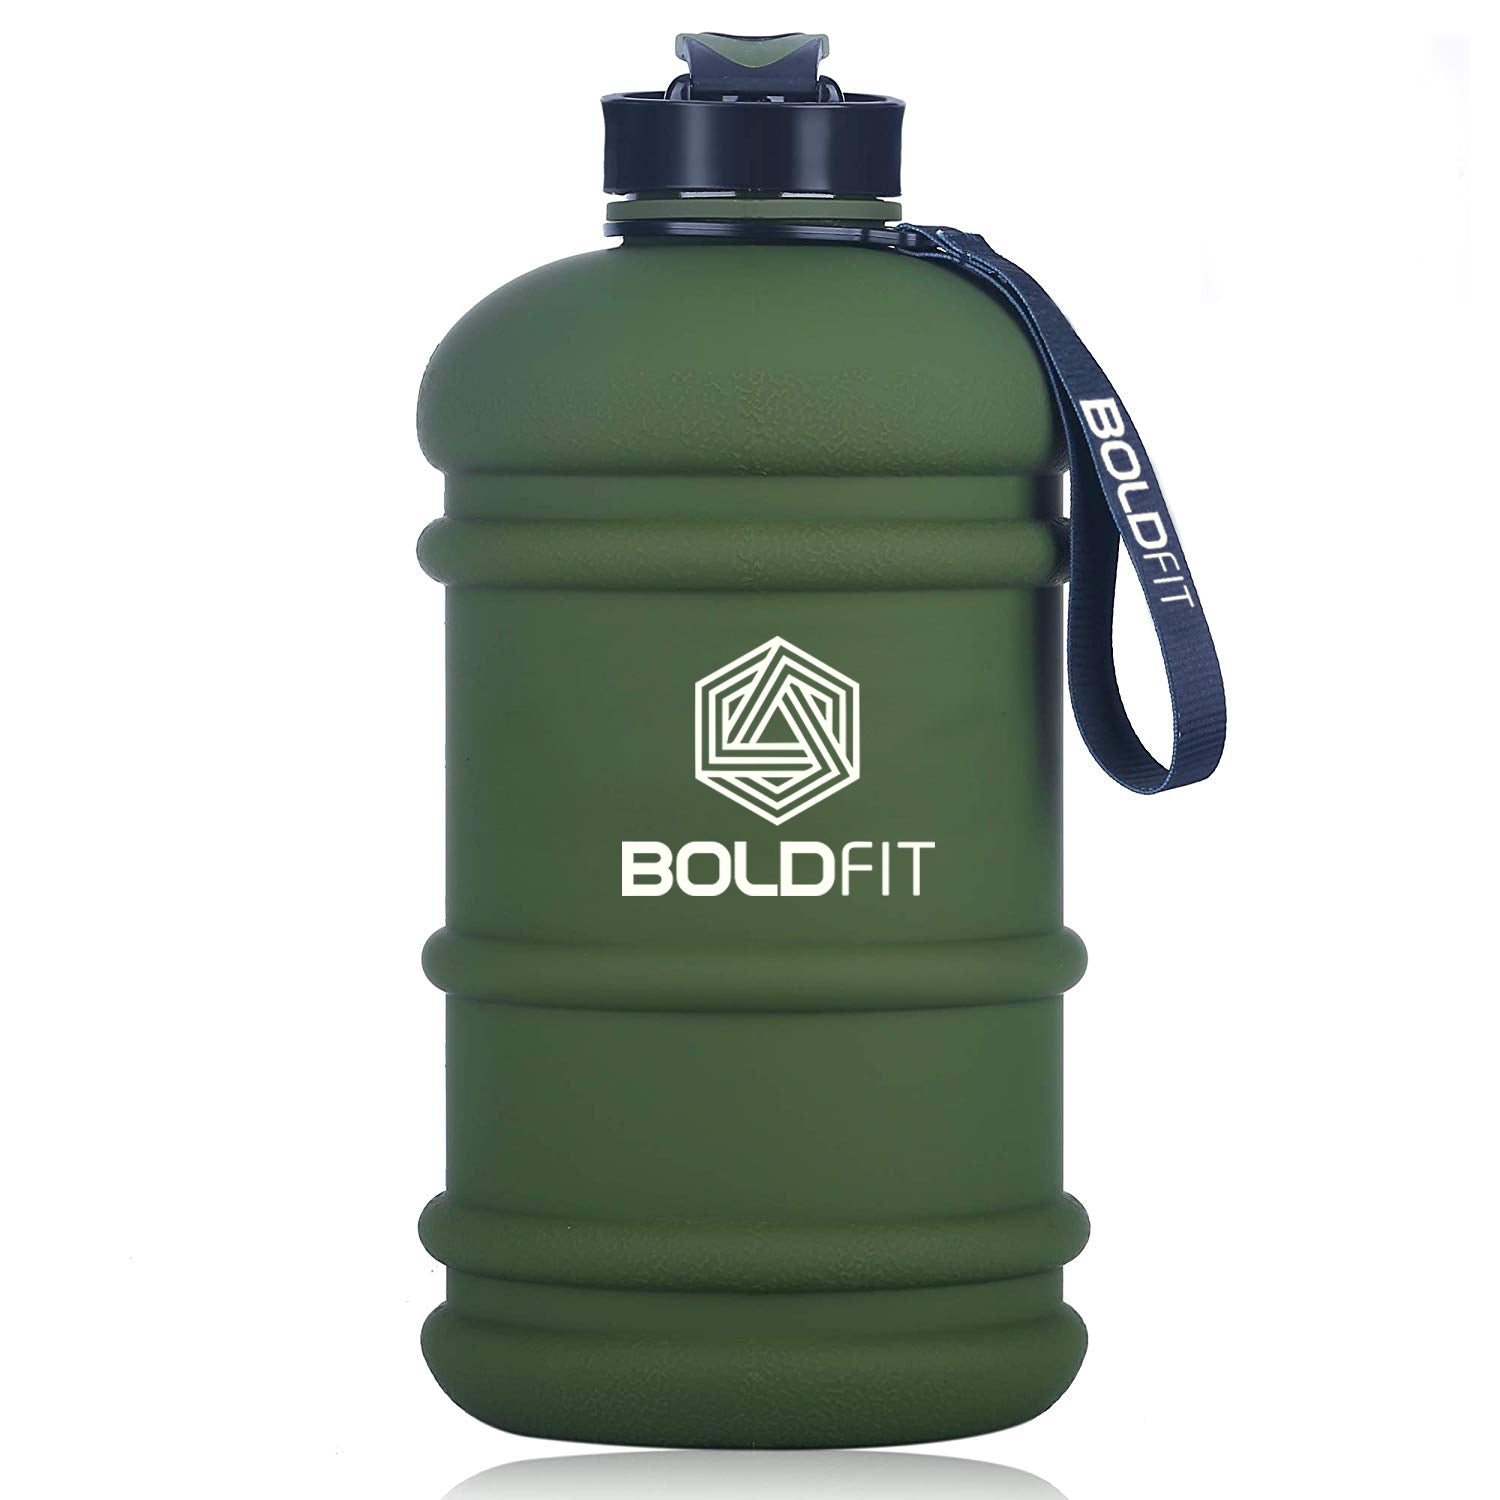 Boldfit Gallon Water Bottle 2. 5 litre with Time Marker motivational water  bottle 2.5 litre For Gym …See more Boldfit Gallon Water Bottle 2. 5 litre